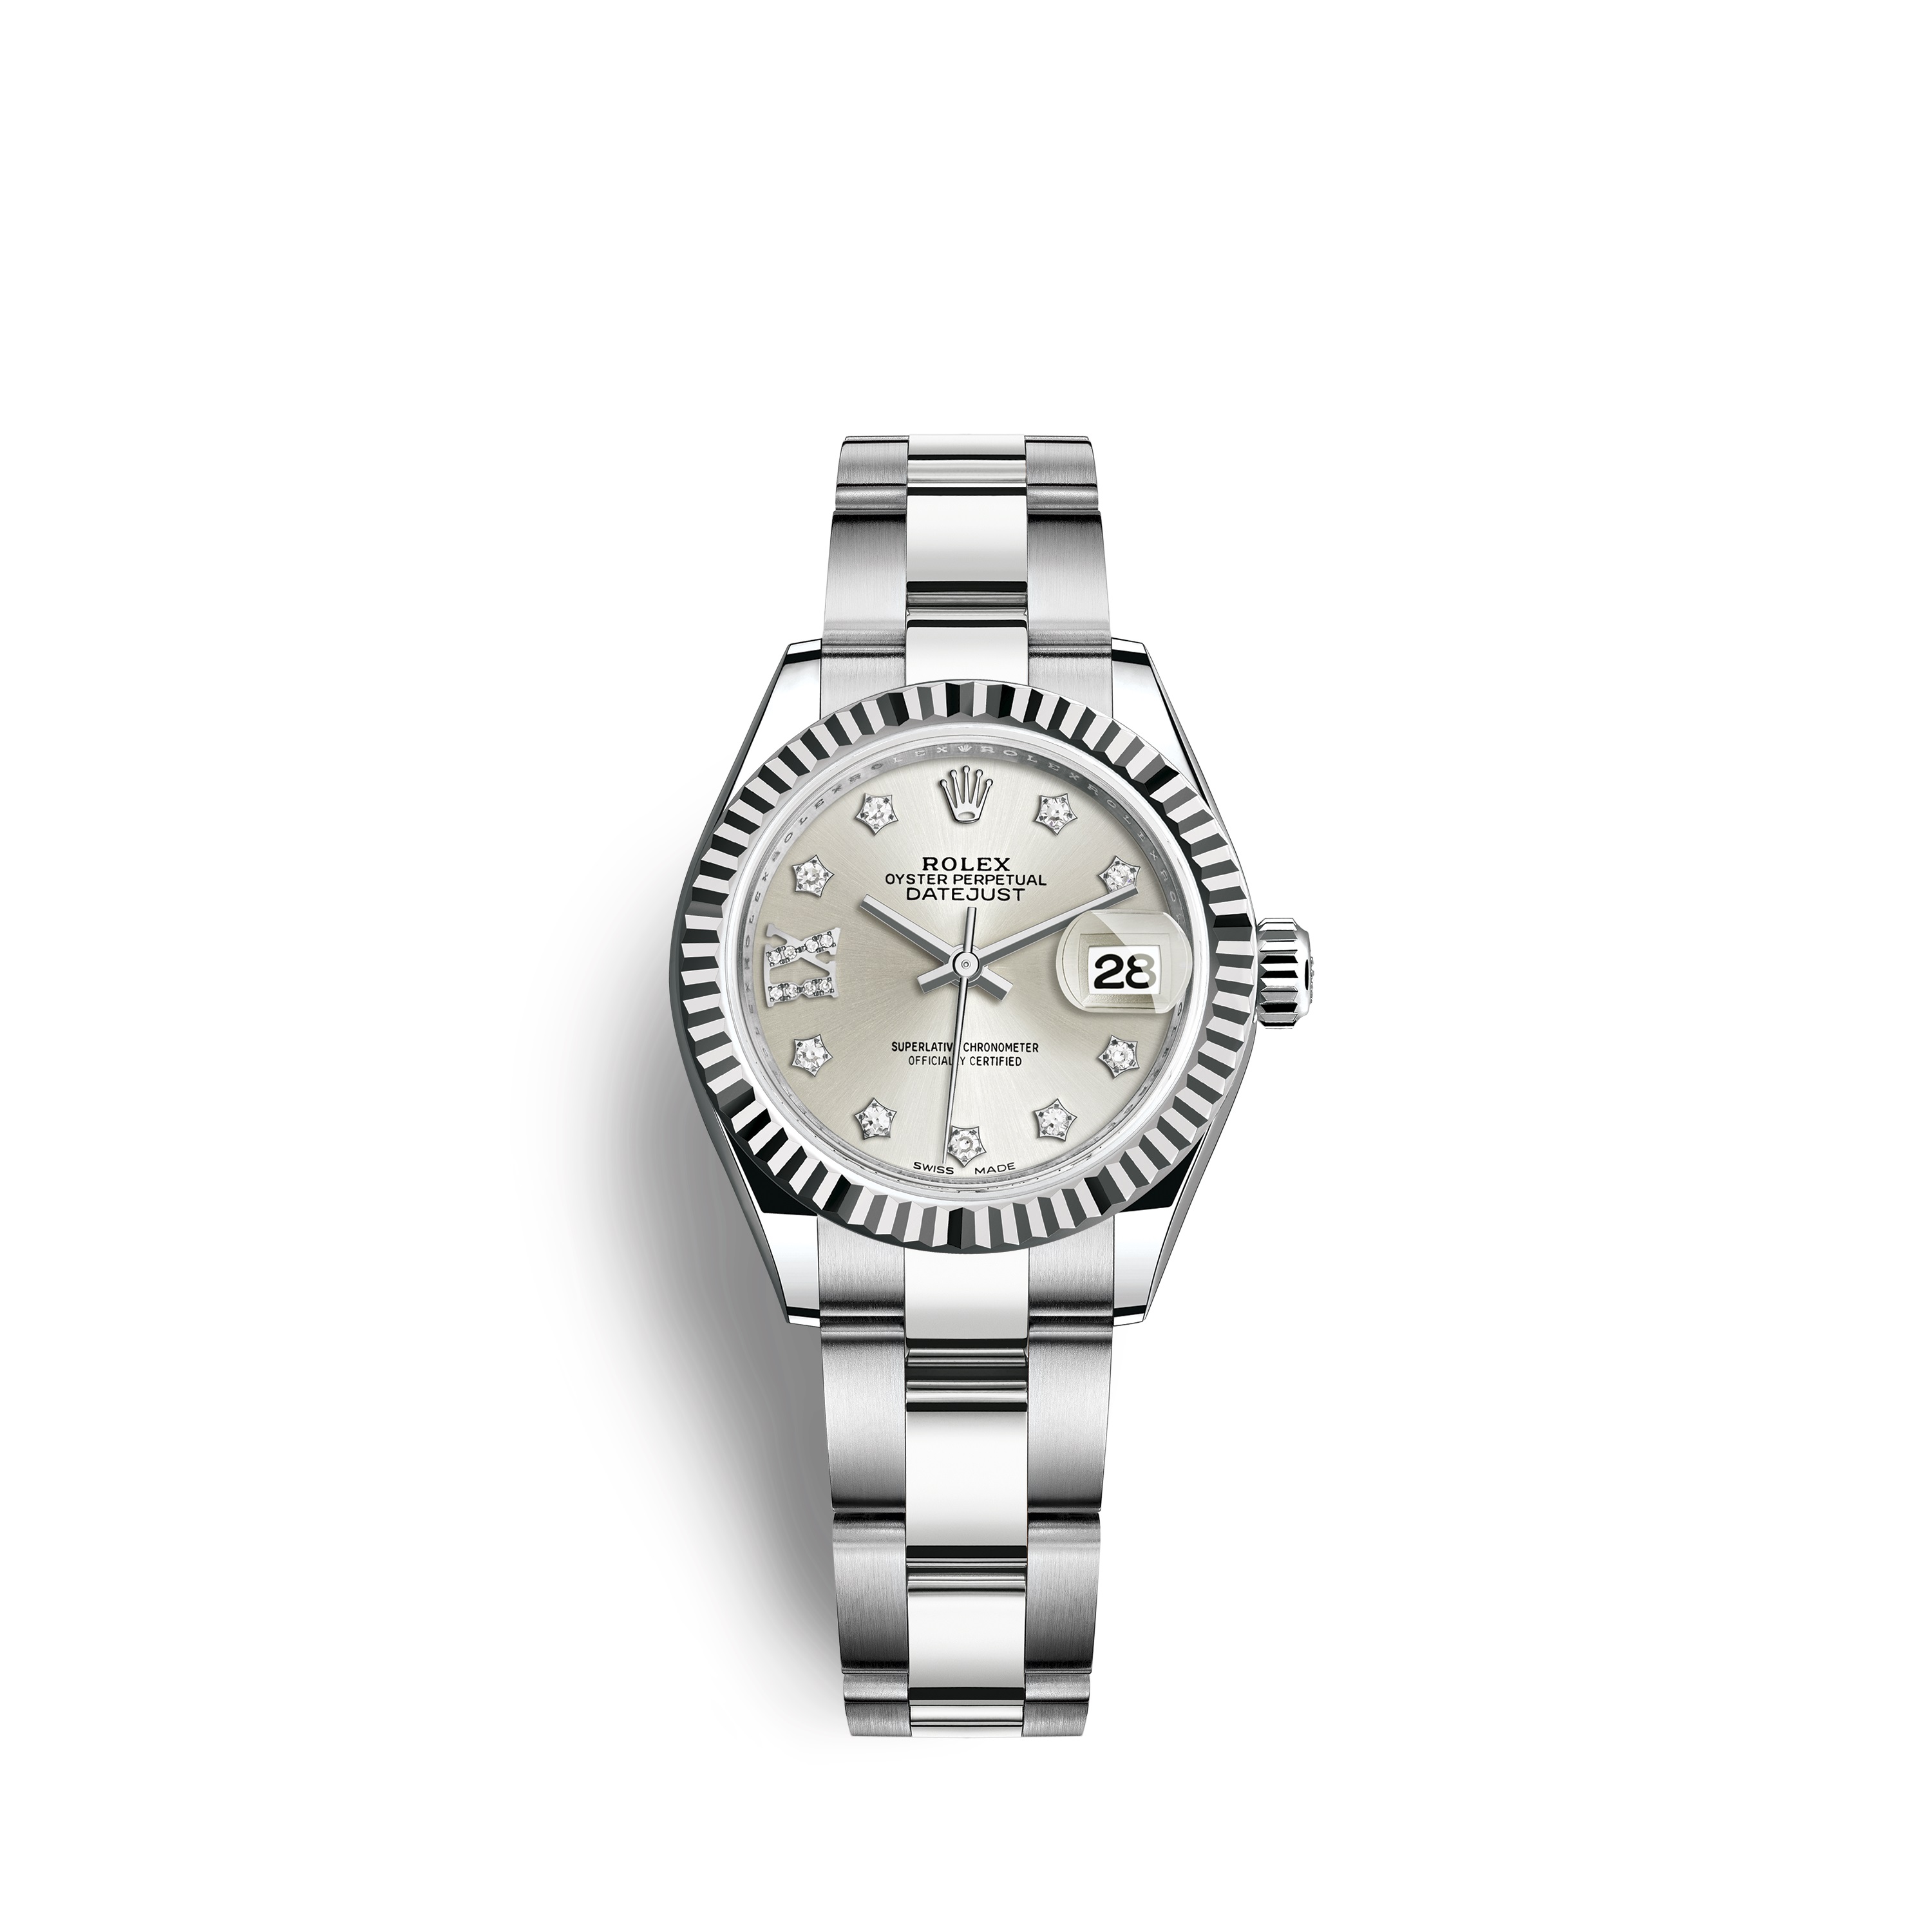 Lady-Datejust 28 279174 White Gold & Stainless Steel Watch (Silver Set with Diamonds)